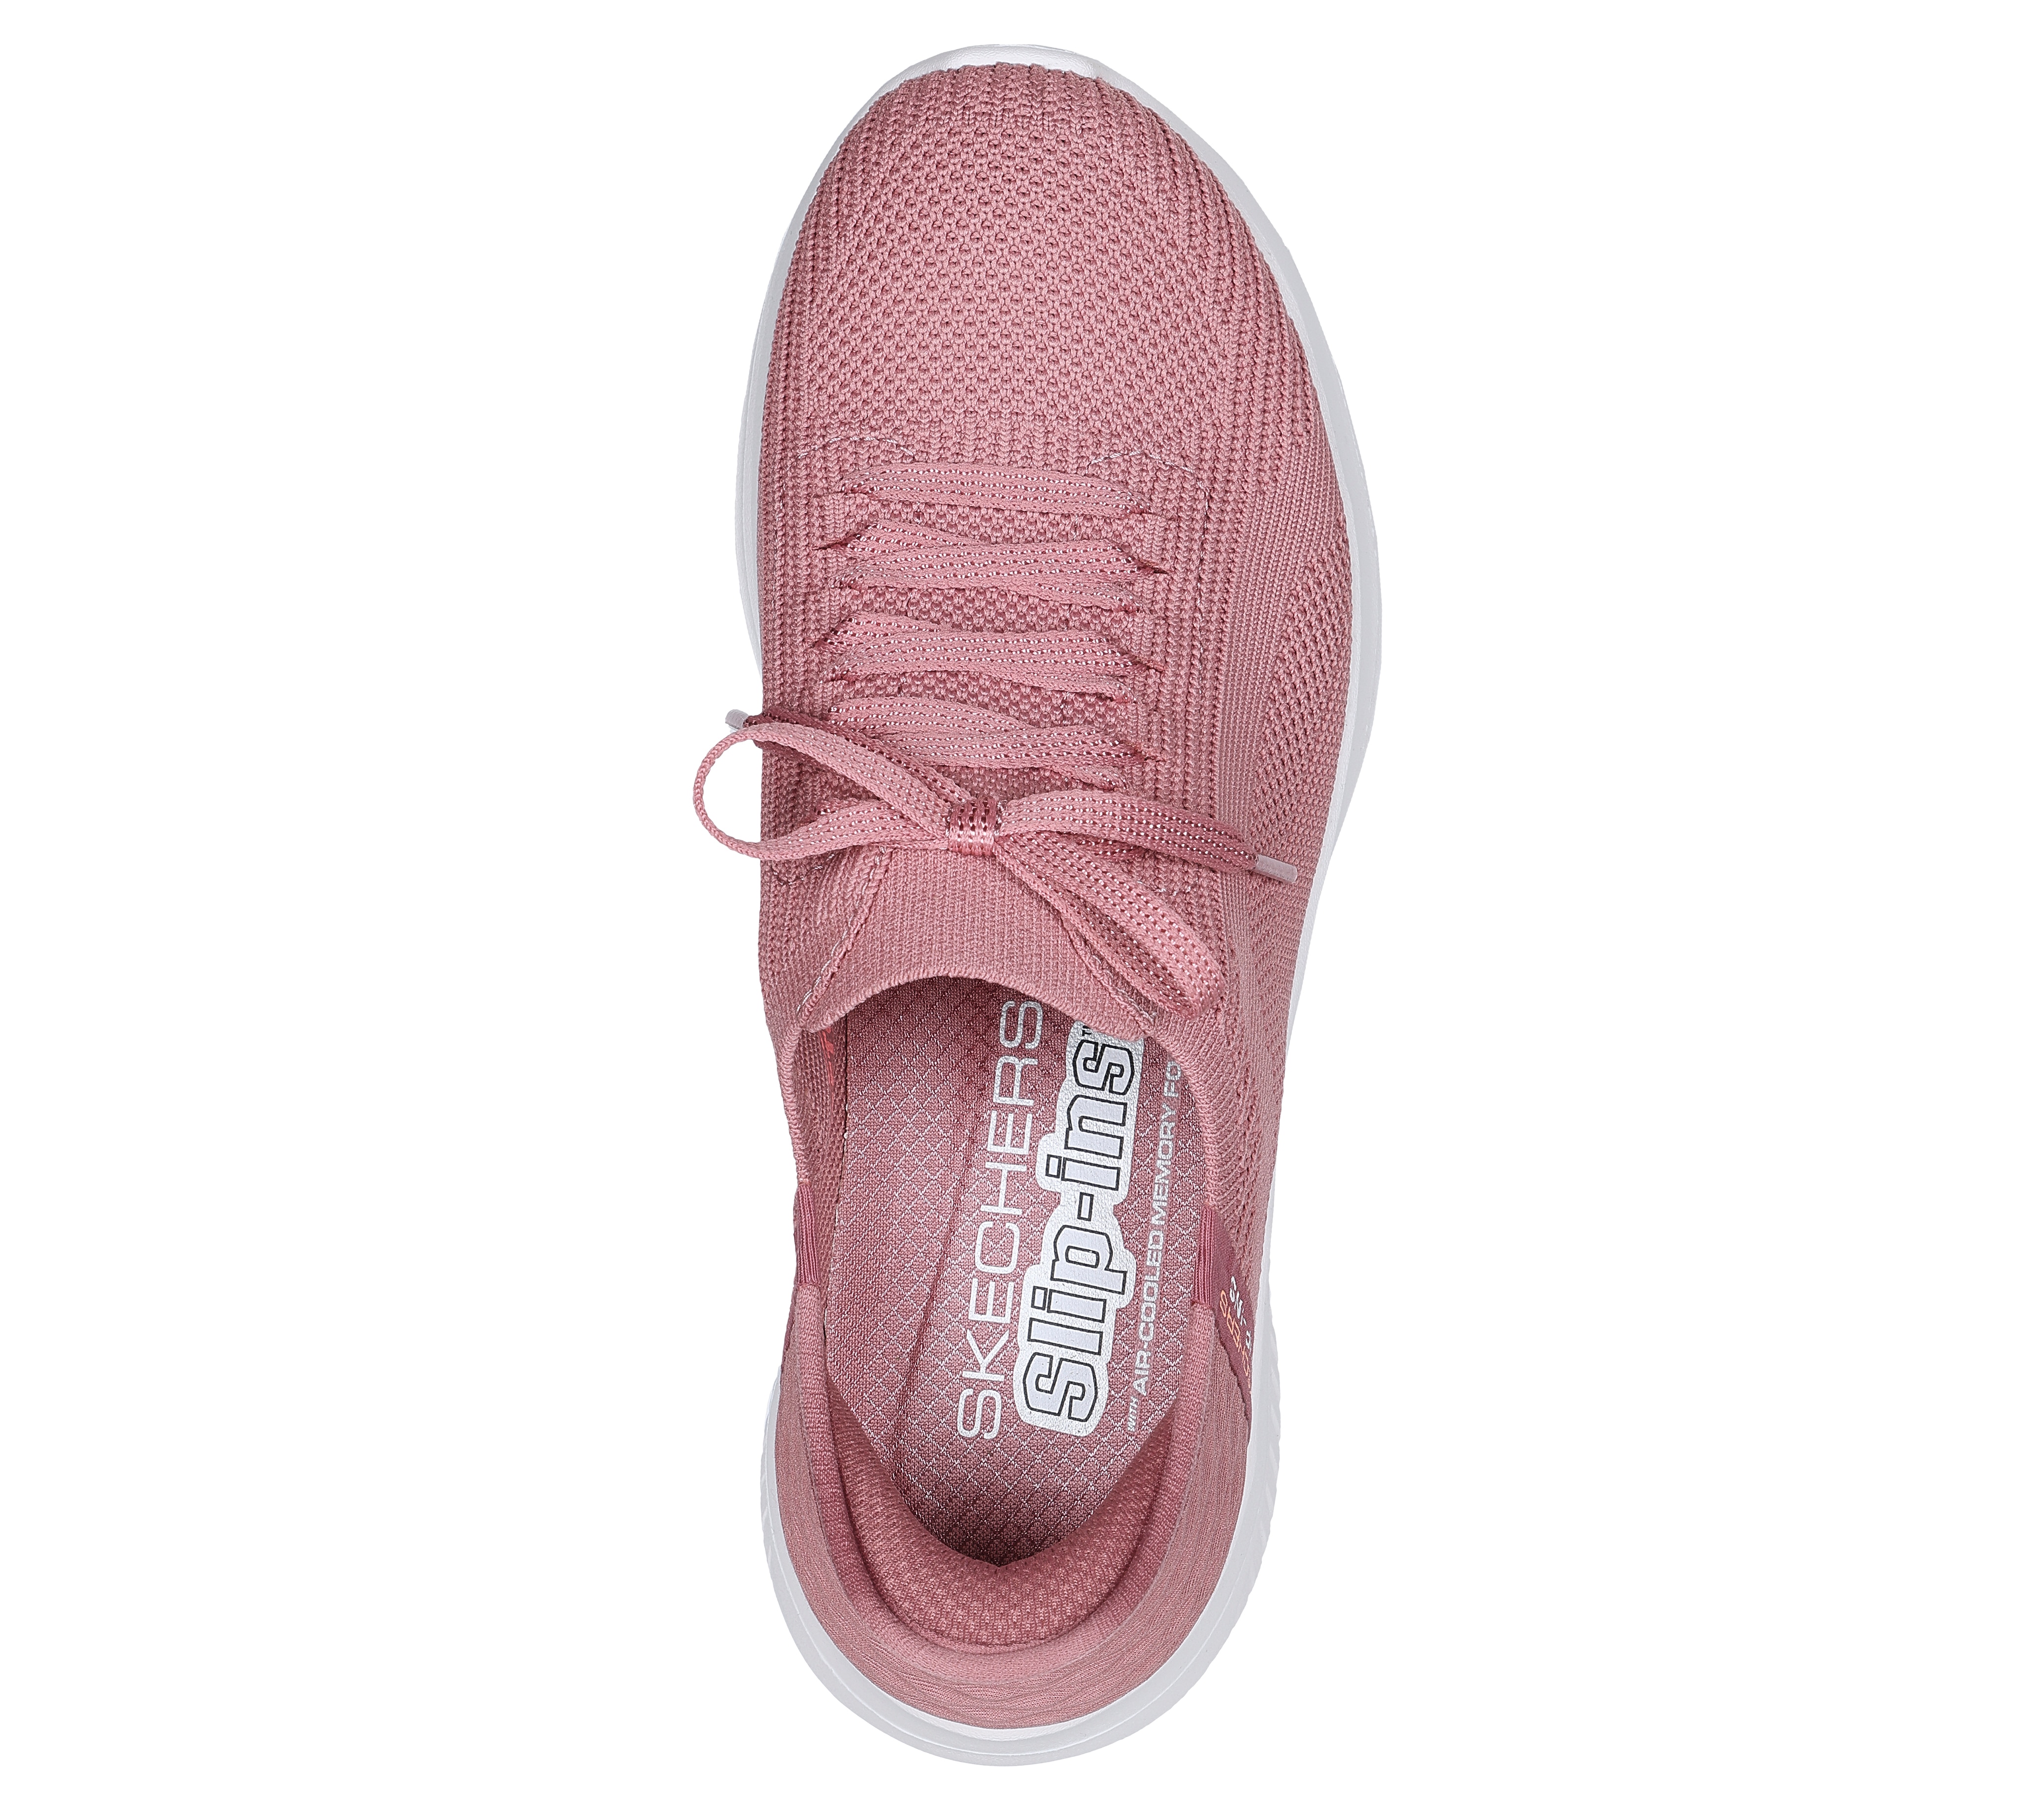 Clothing & Shoes - Shoes - Sneakers - Skechers Ultra Flex 3.0 